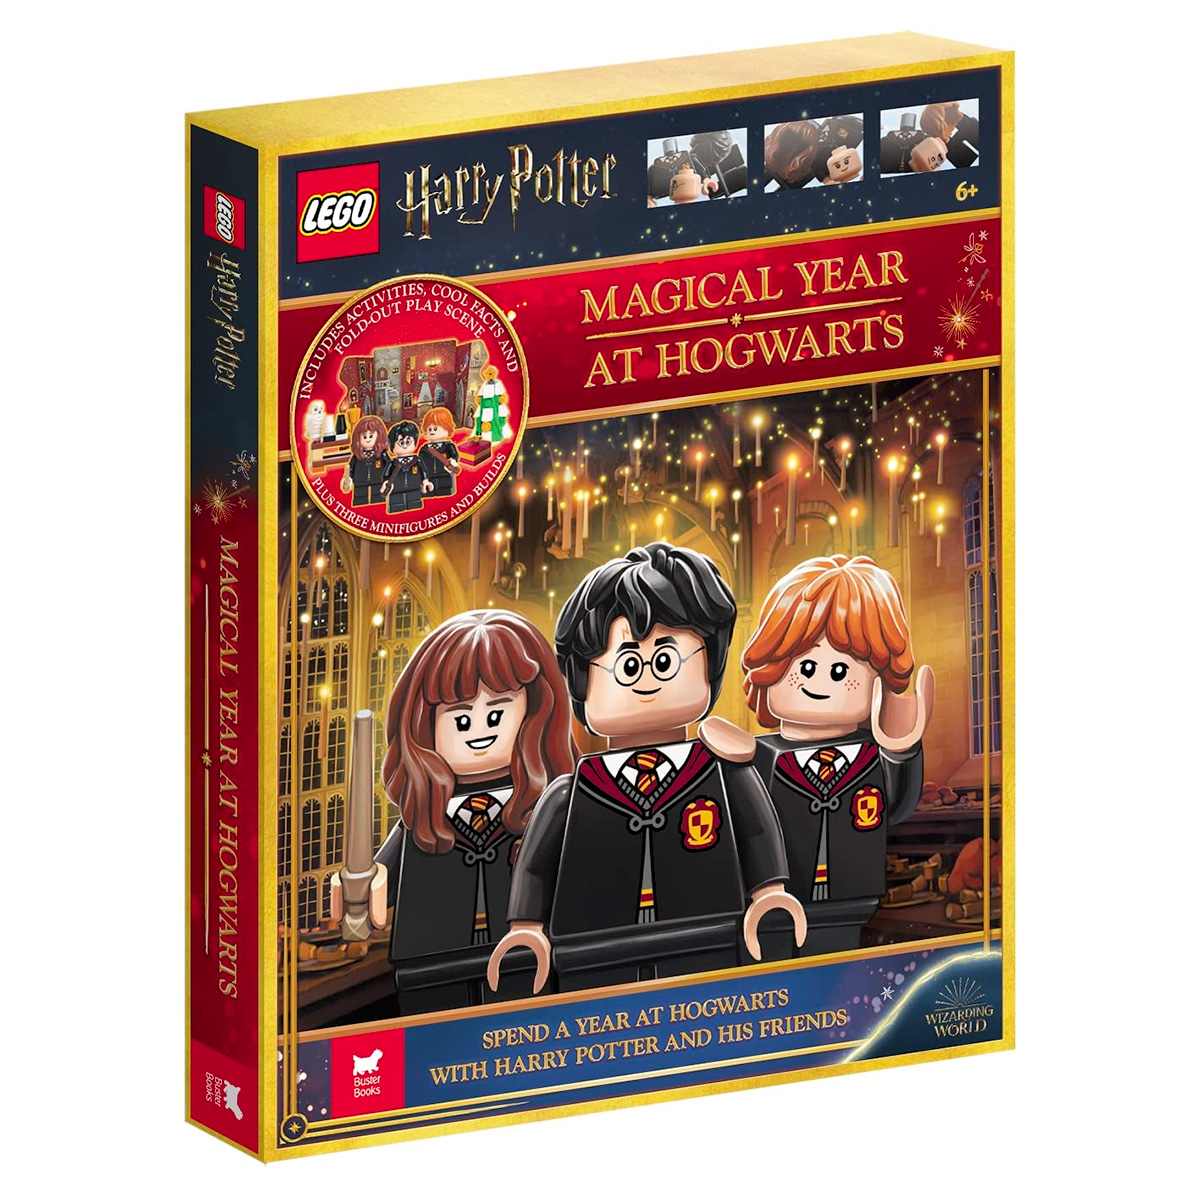 In arrivo a ottobre 2023: LEGO Harry Potter Magical Year at Hogwarts